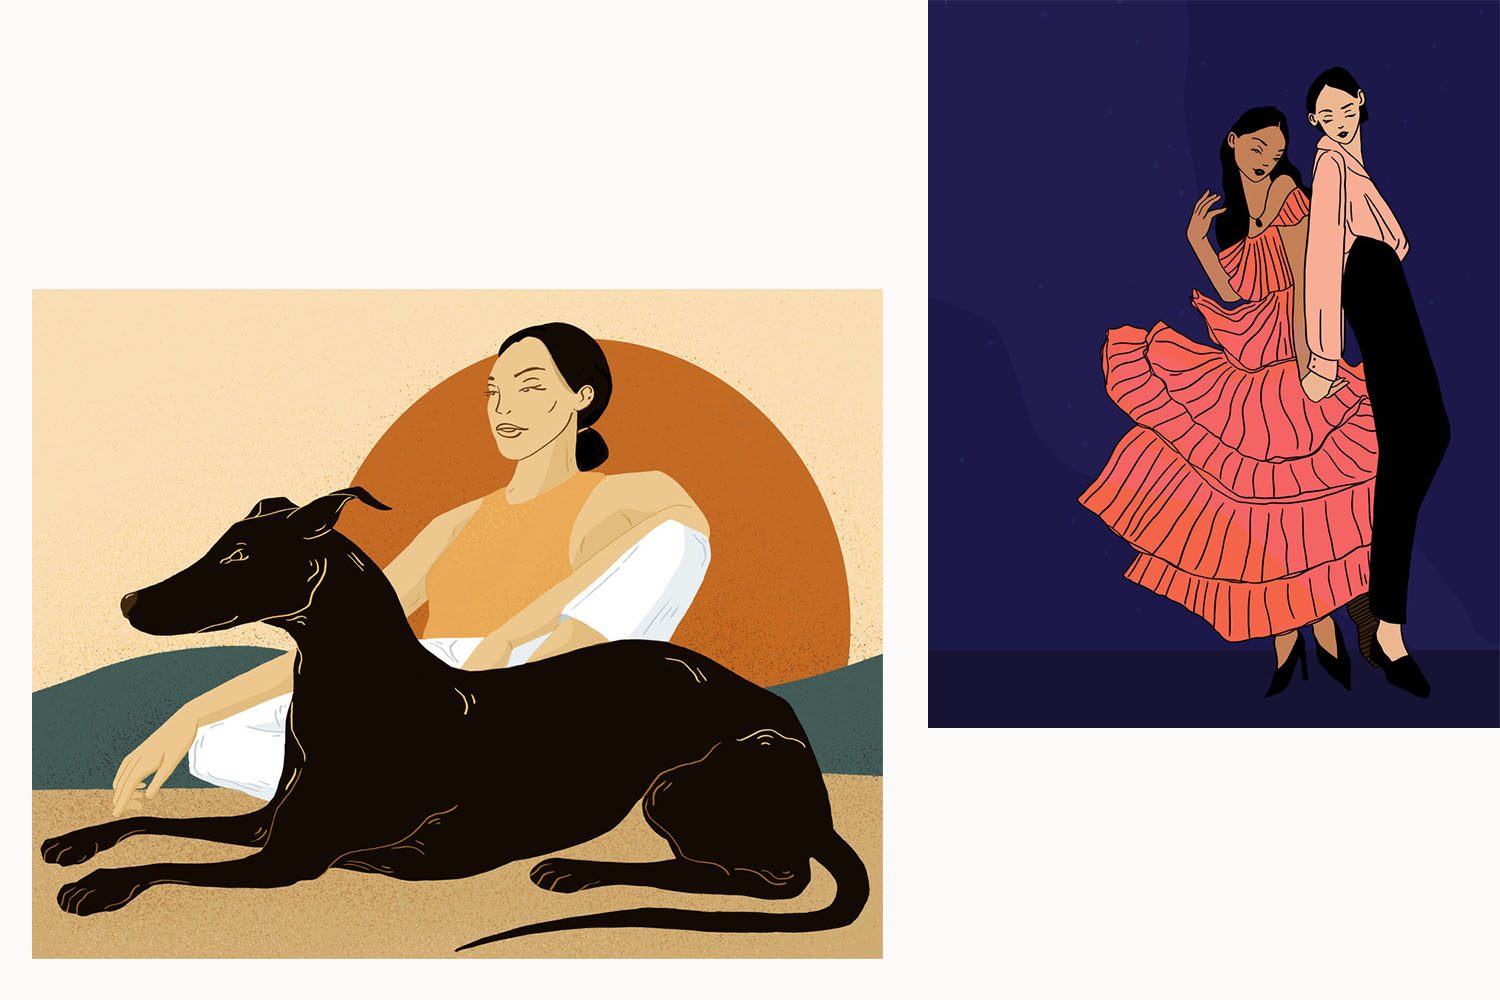 Nancy's Artwork. One of women with dog enjoying the sun. On the right, two women dancing in the night.